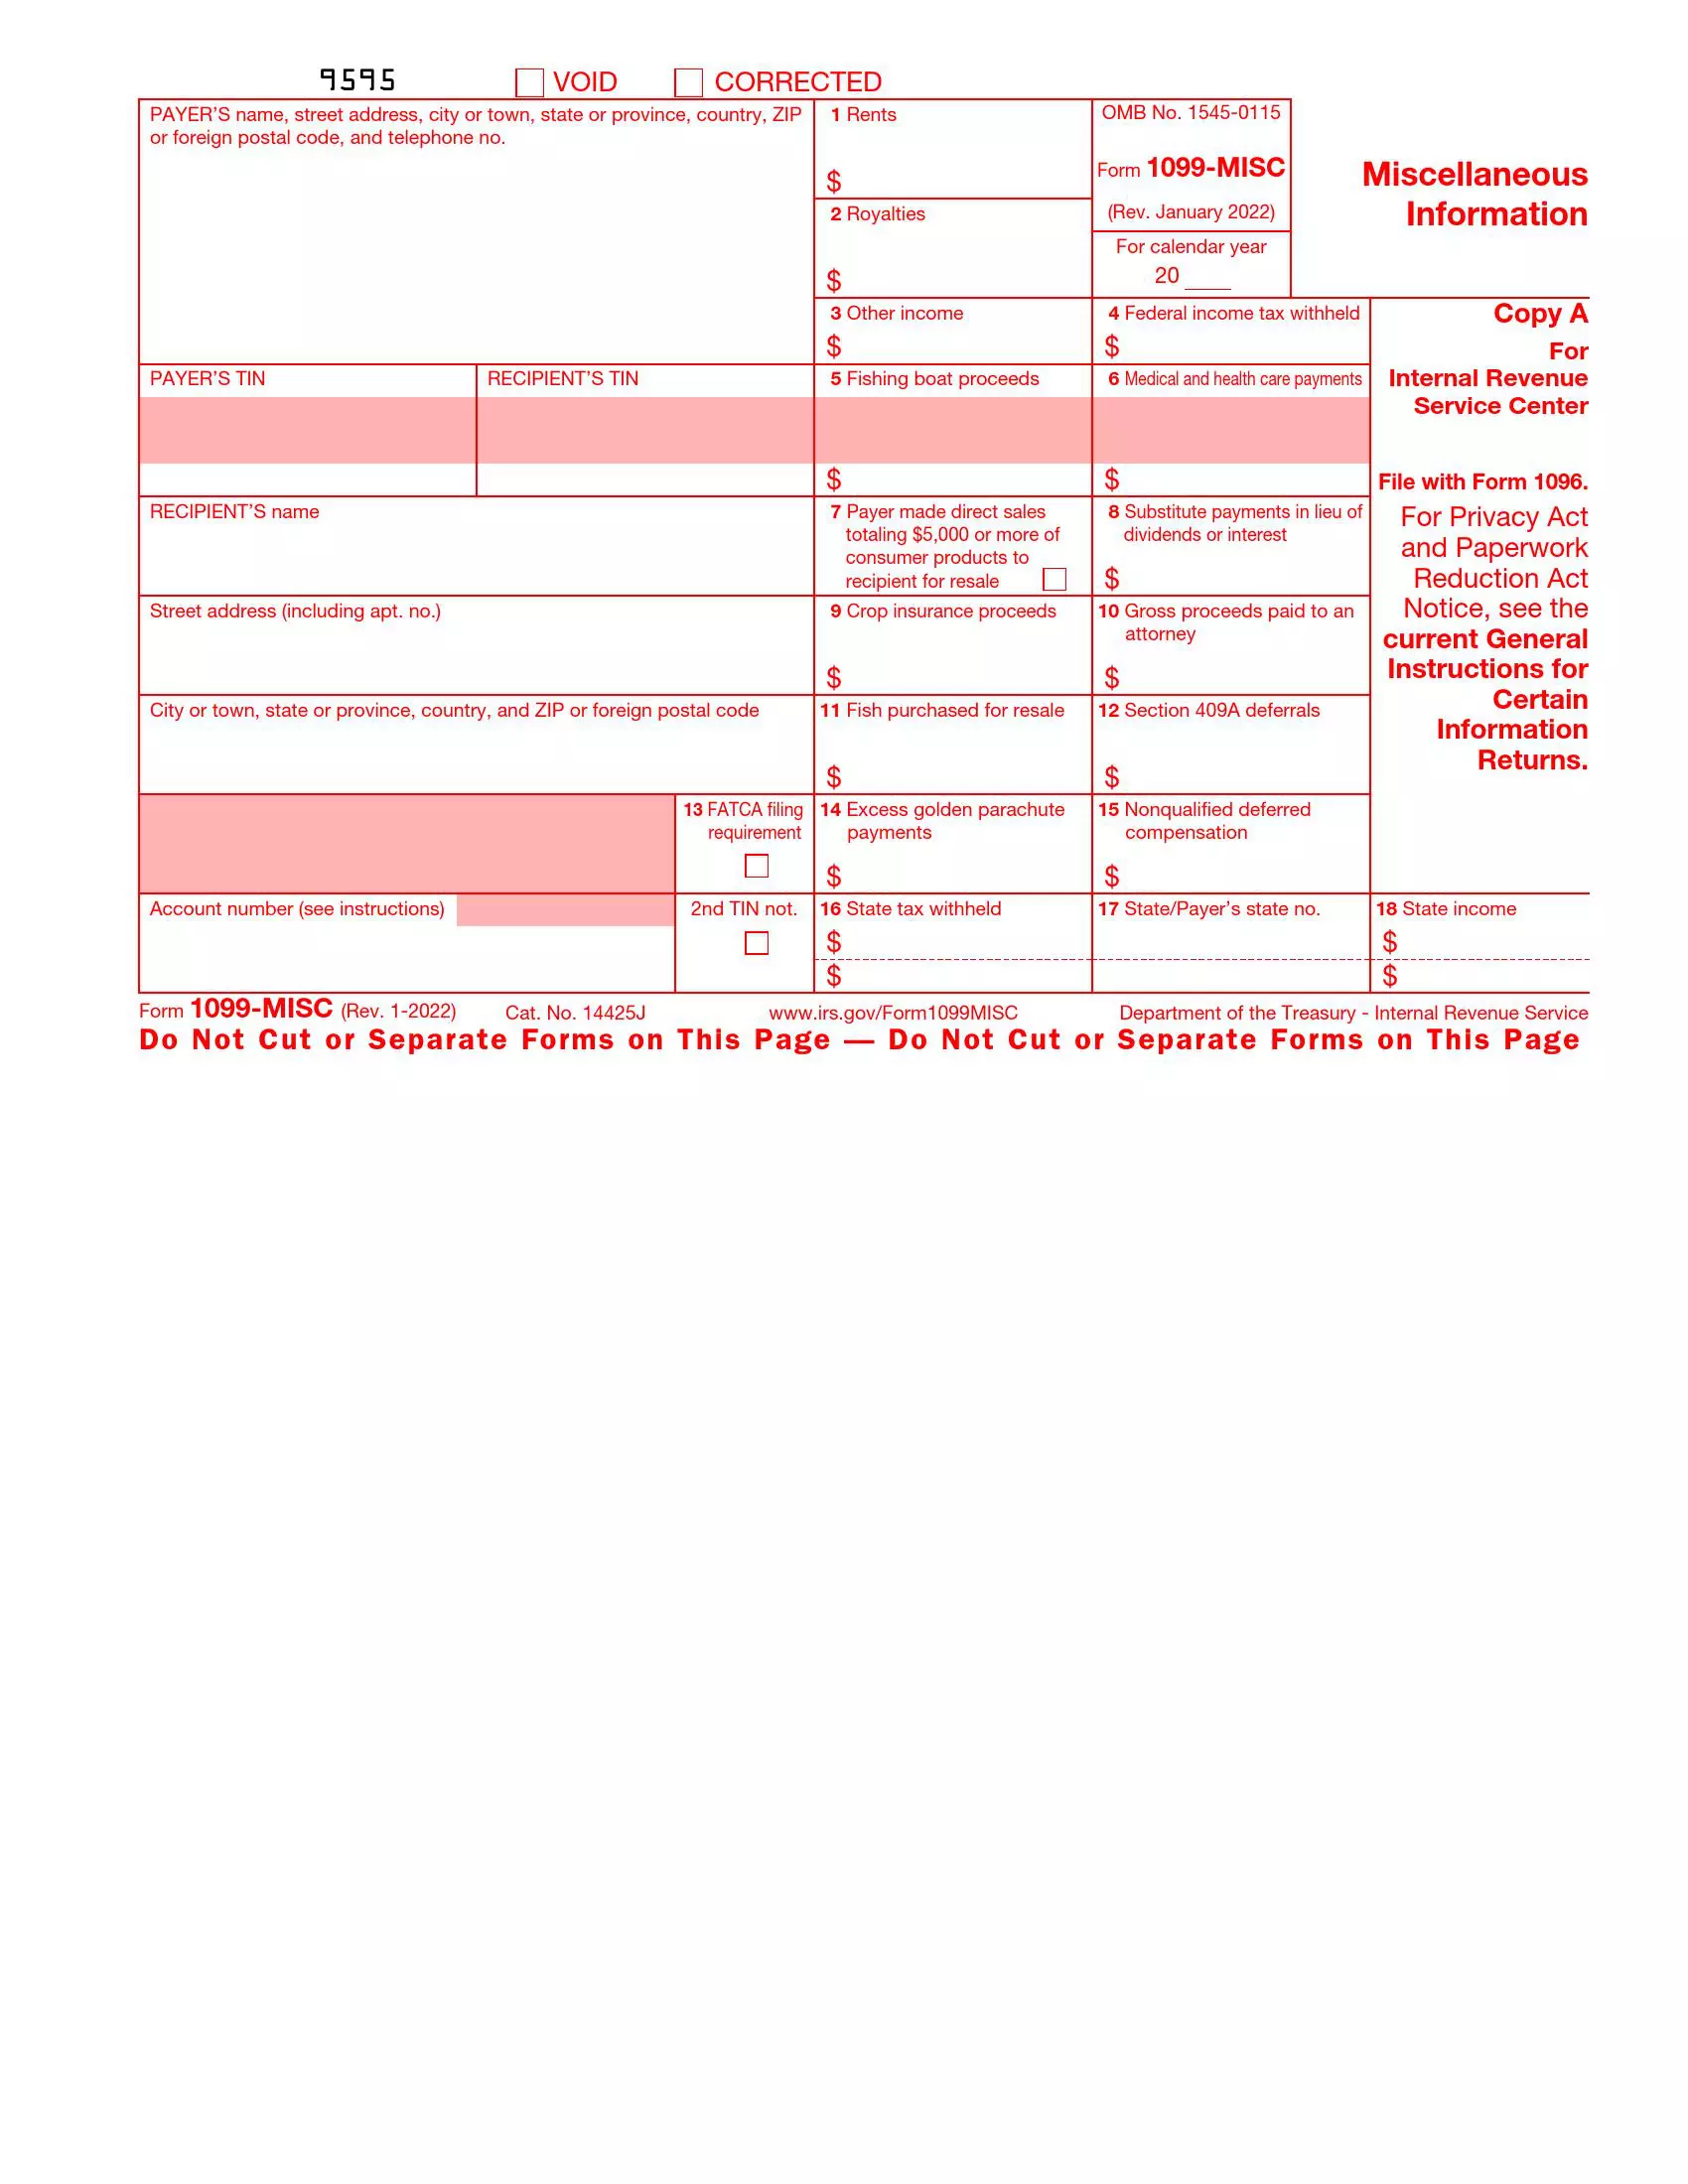 irs form 1099-misc rev 01 2022 preview